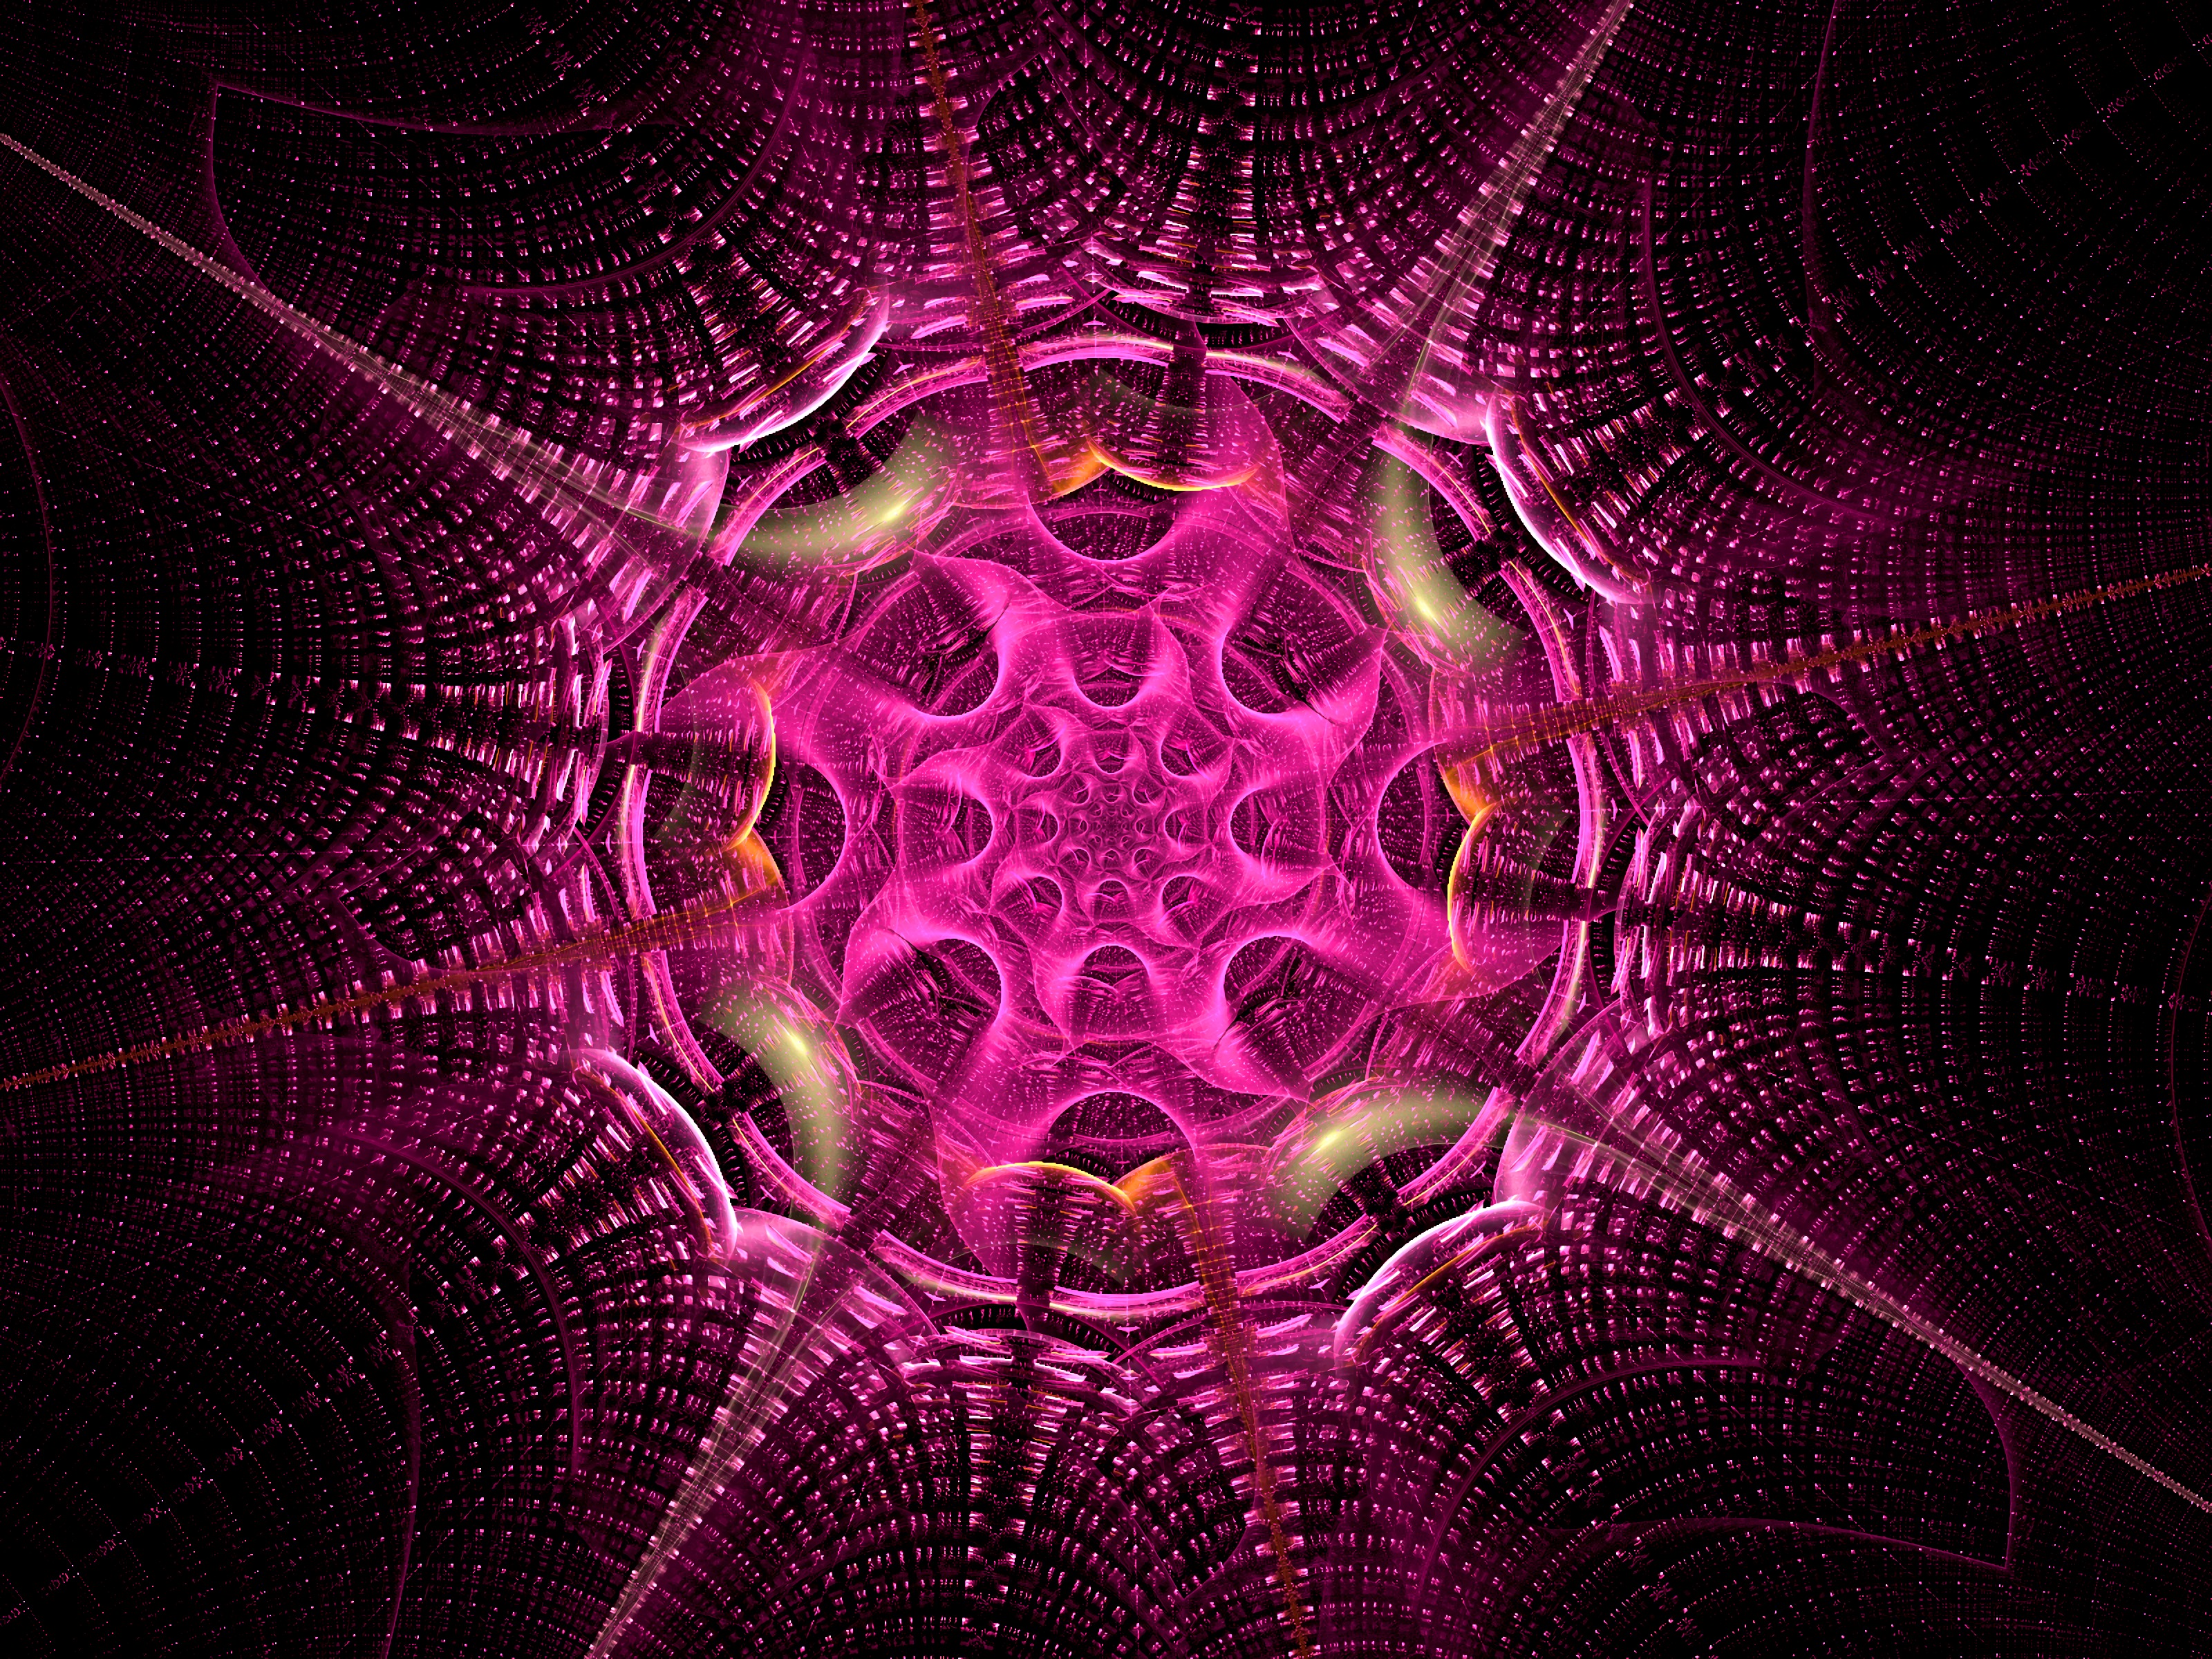 purple, abstract, violet, pattern, fractal, confused, intricate, swirling, involute